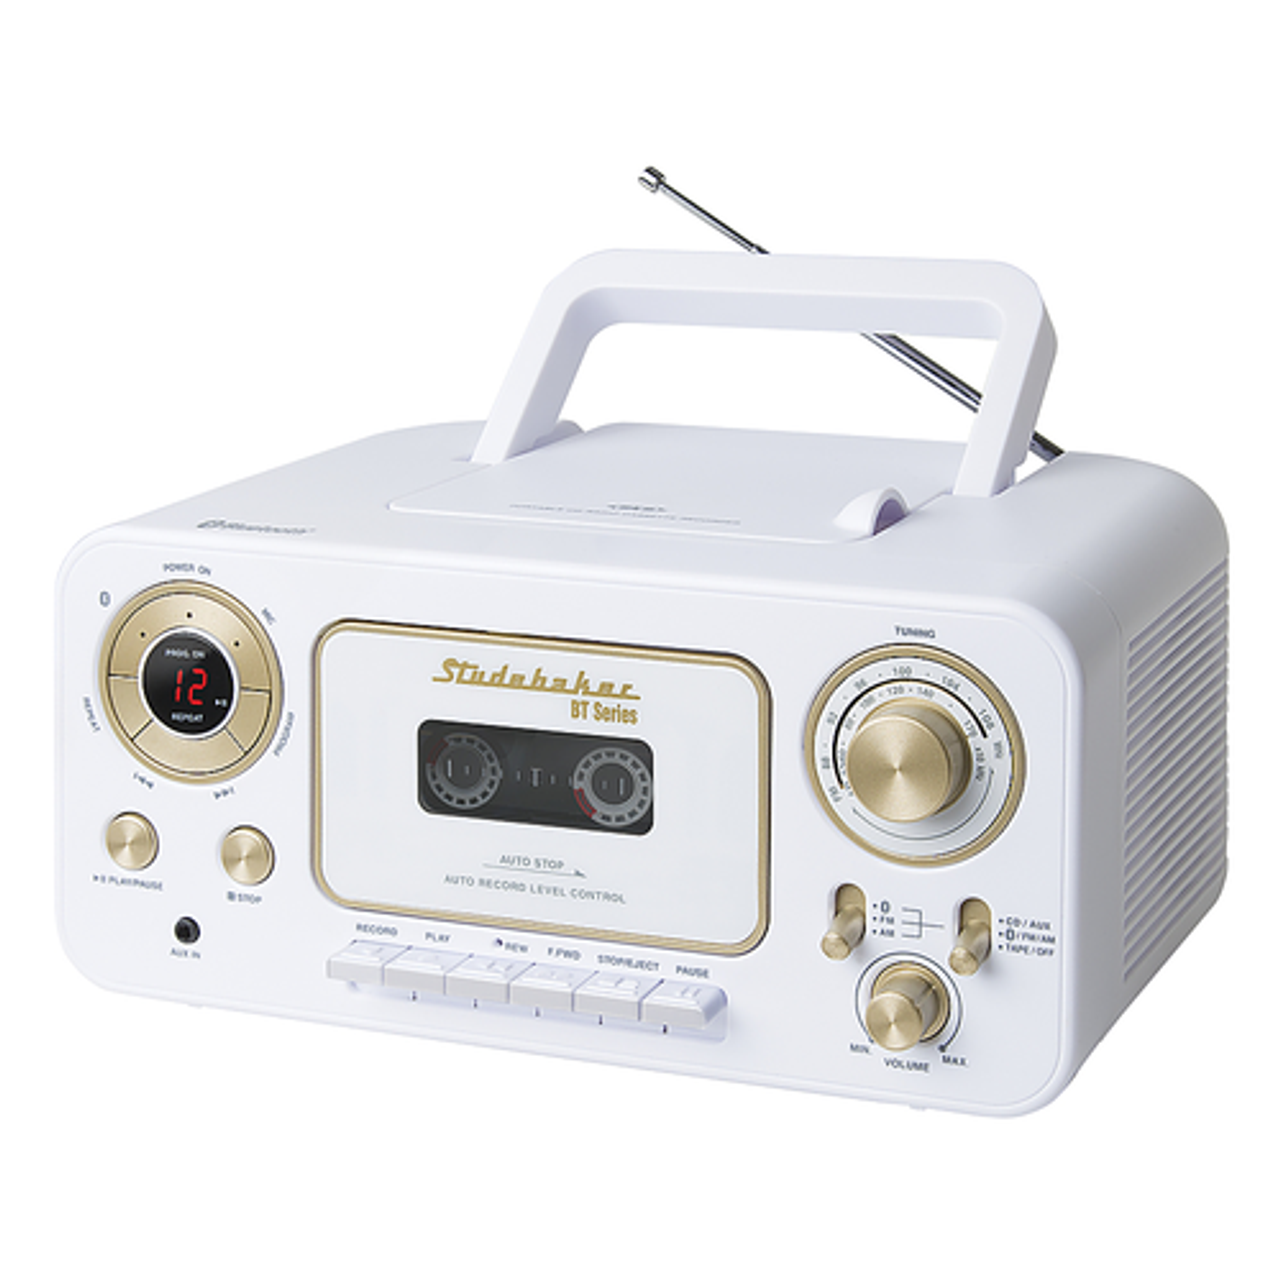 Studebaker - Portable Stereo CD Player with Bluetooth, AM/FM Stereo Radio and Cassette Player/Recorder - White